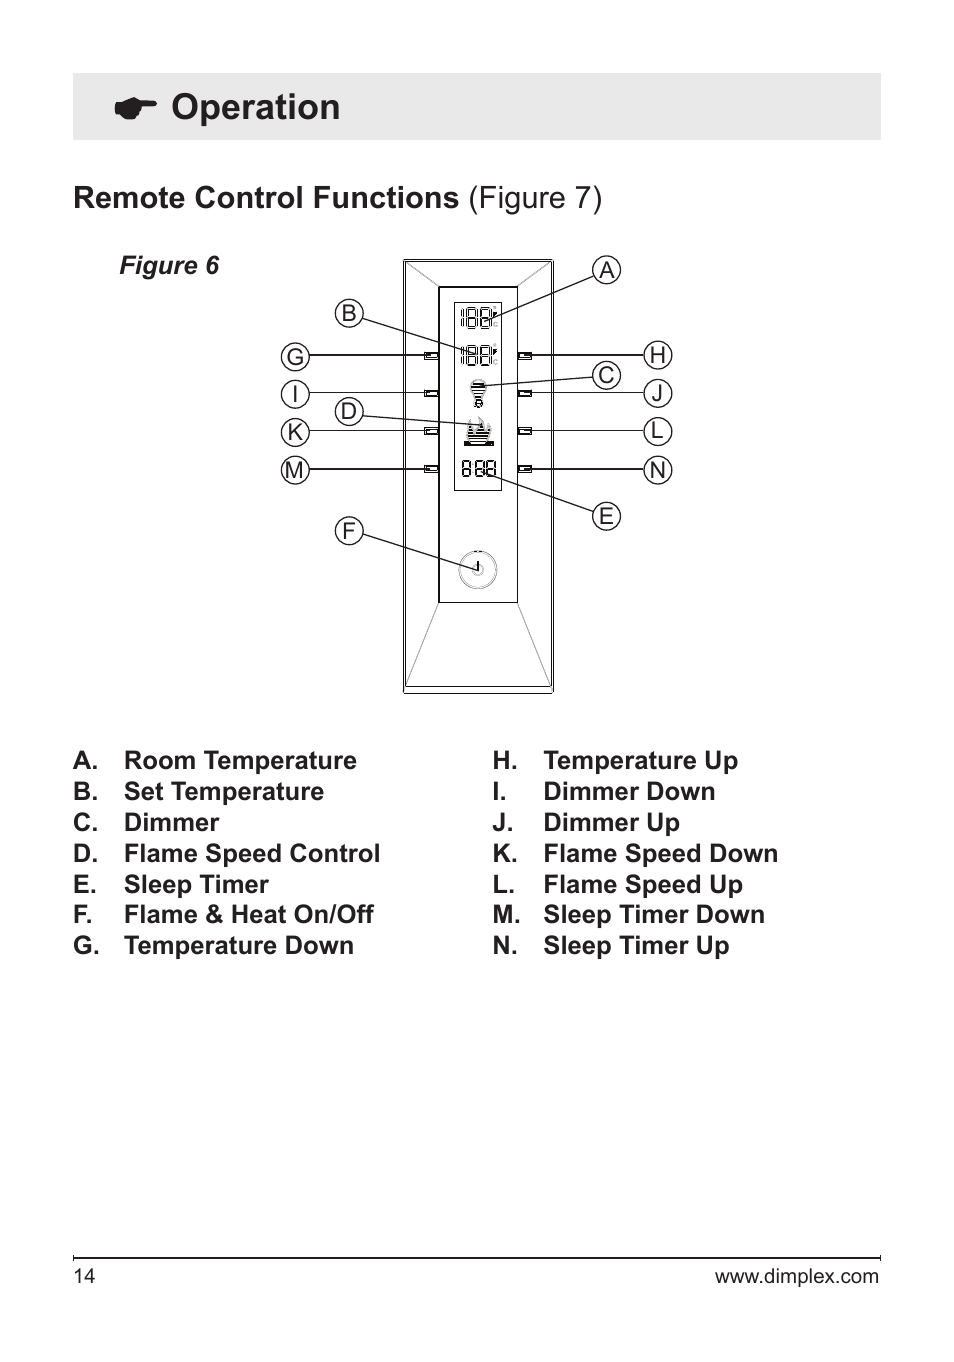 Operation, Remote control functions (figure 7) | Dimplex Electric